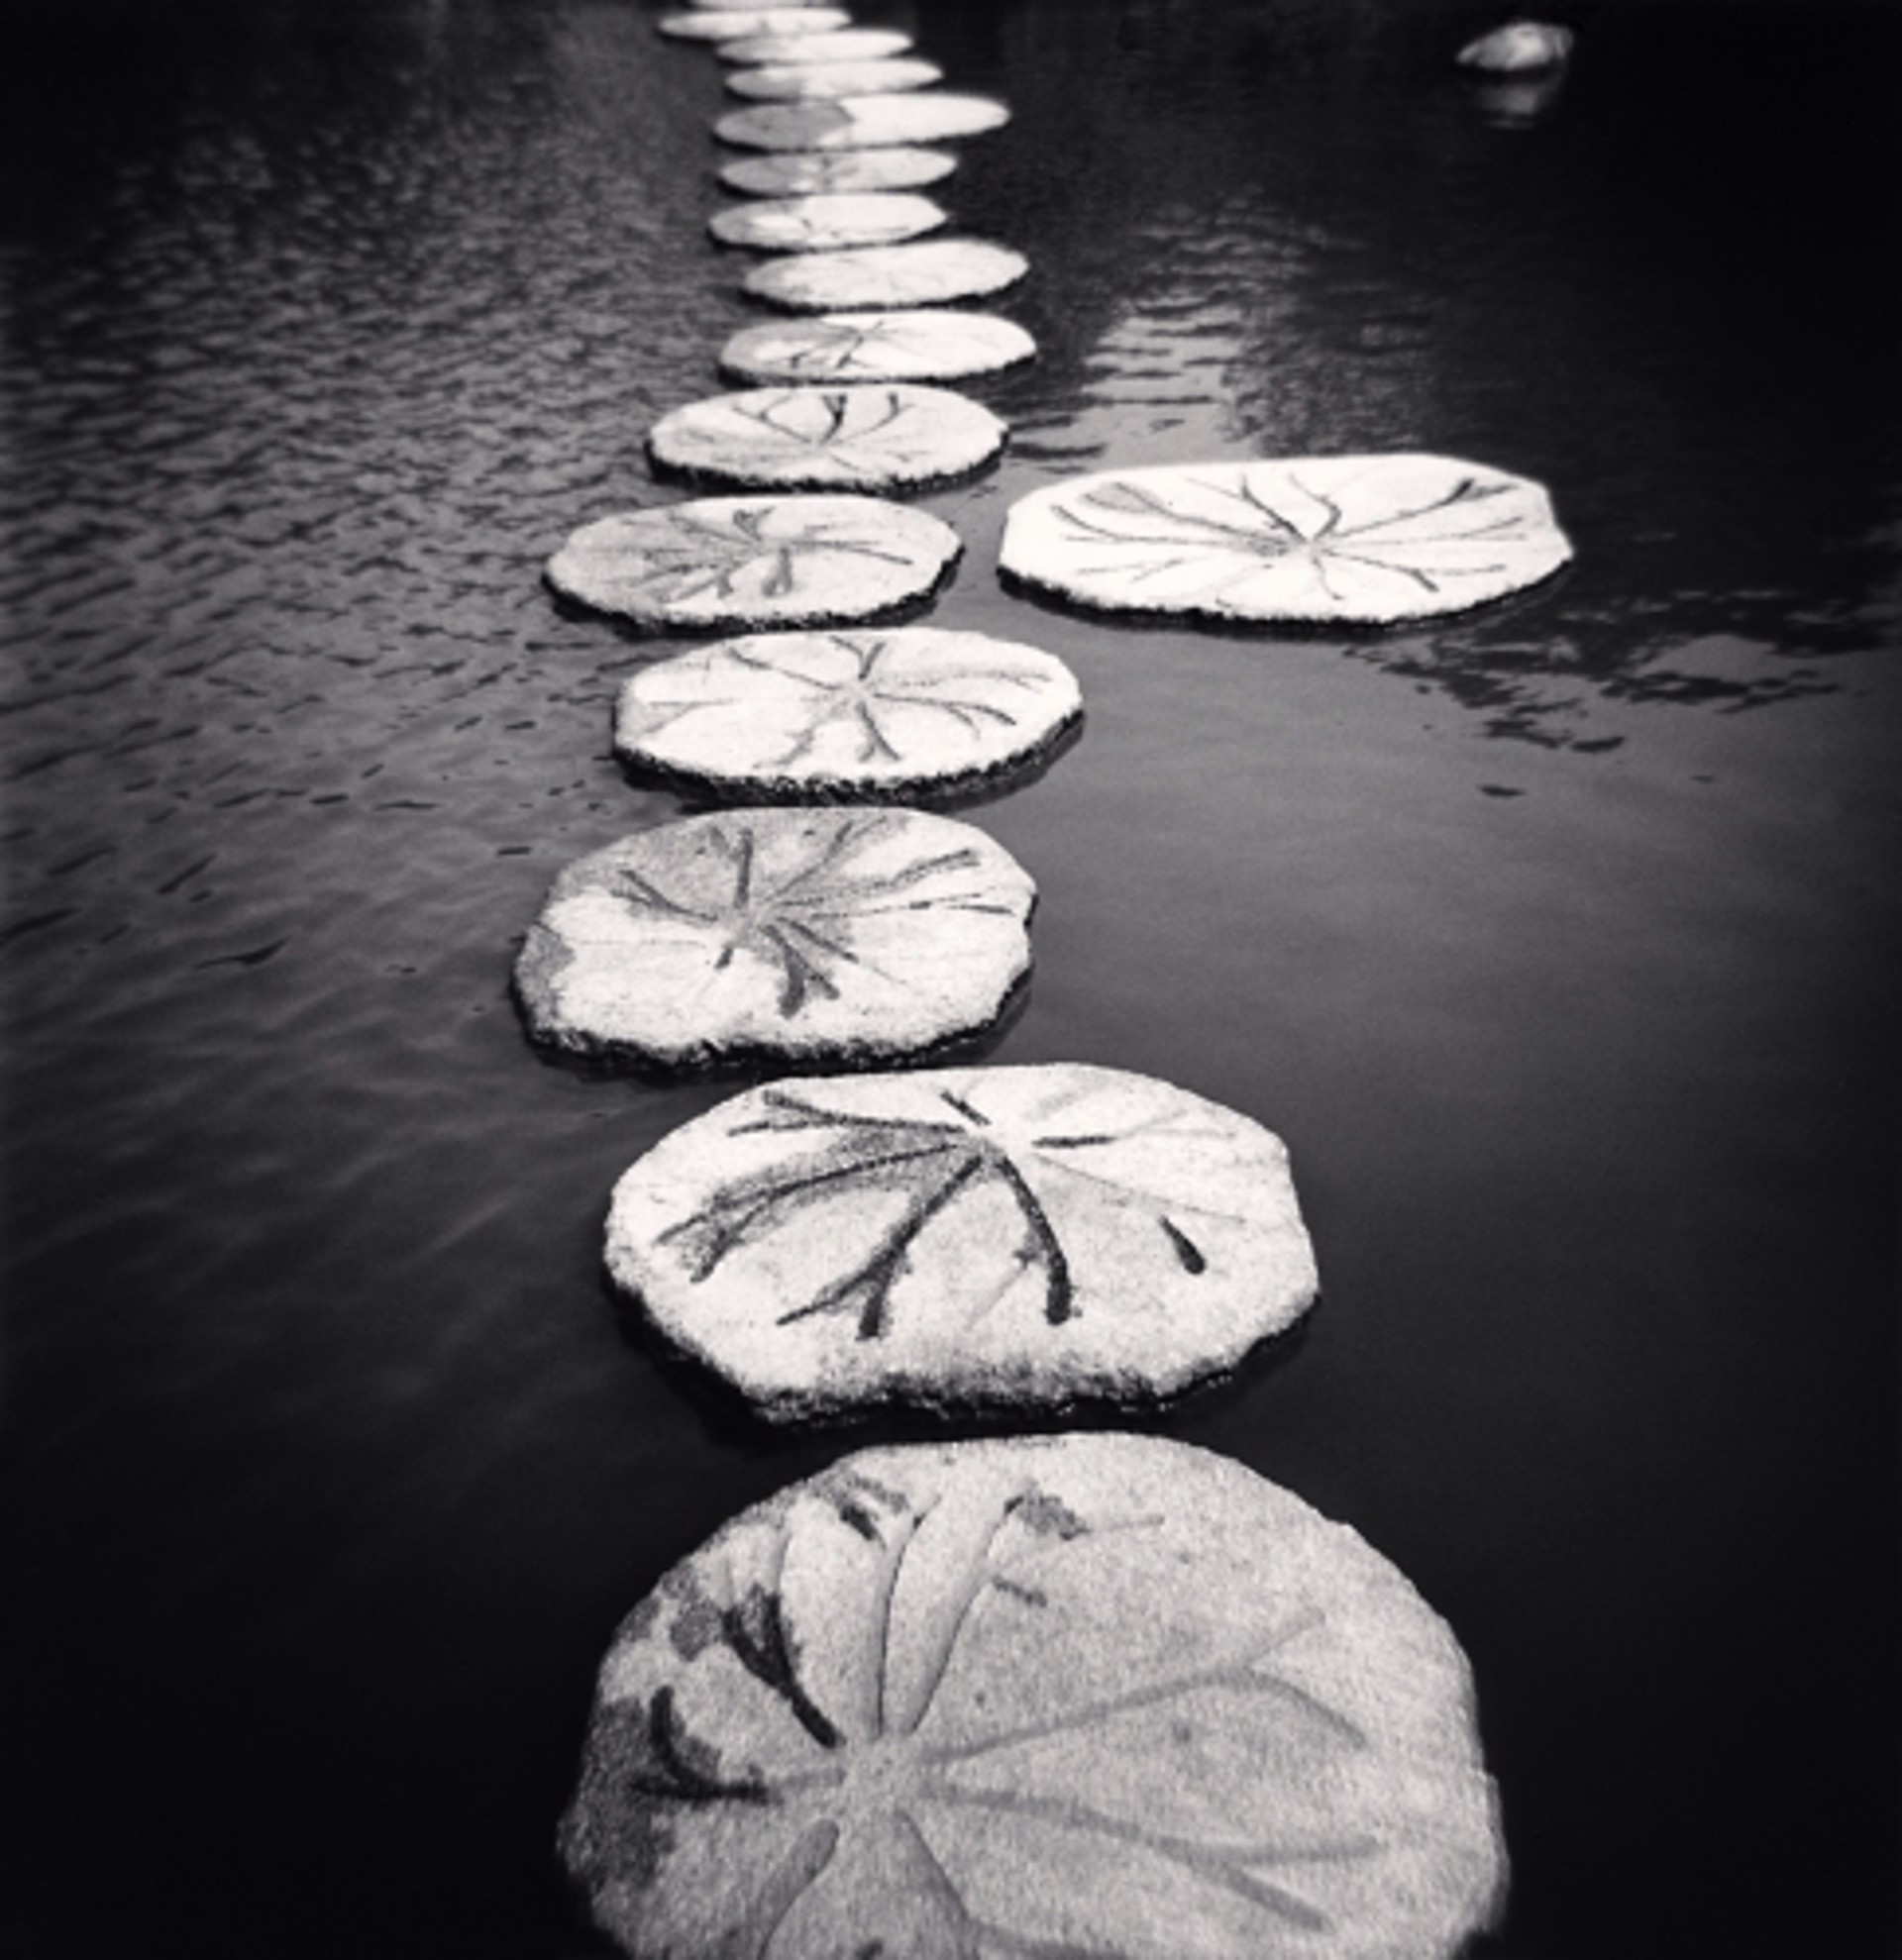 Stepping Stones, Marugame, Shikoku (edition of 25) by Michael Kenna